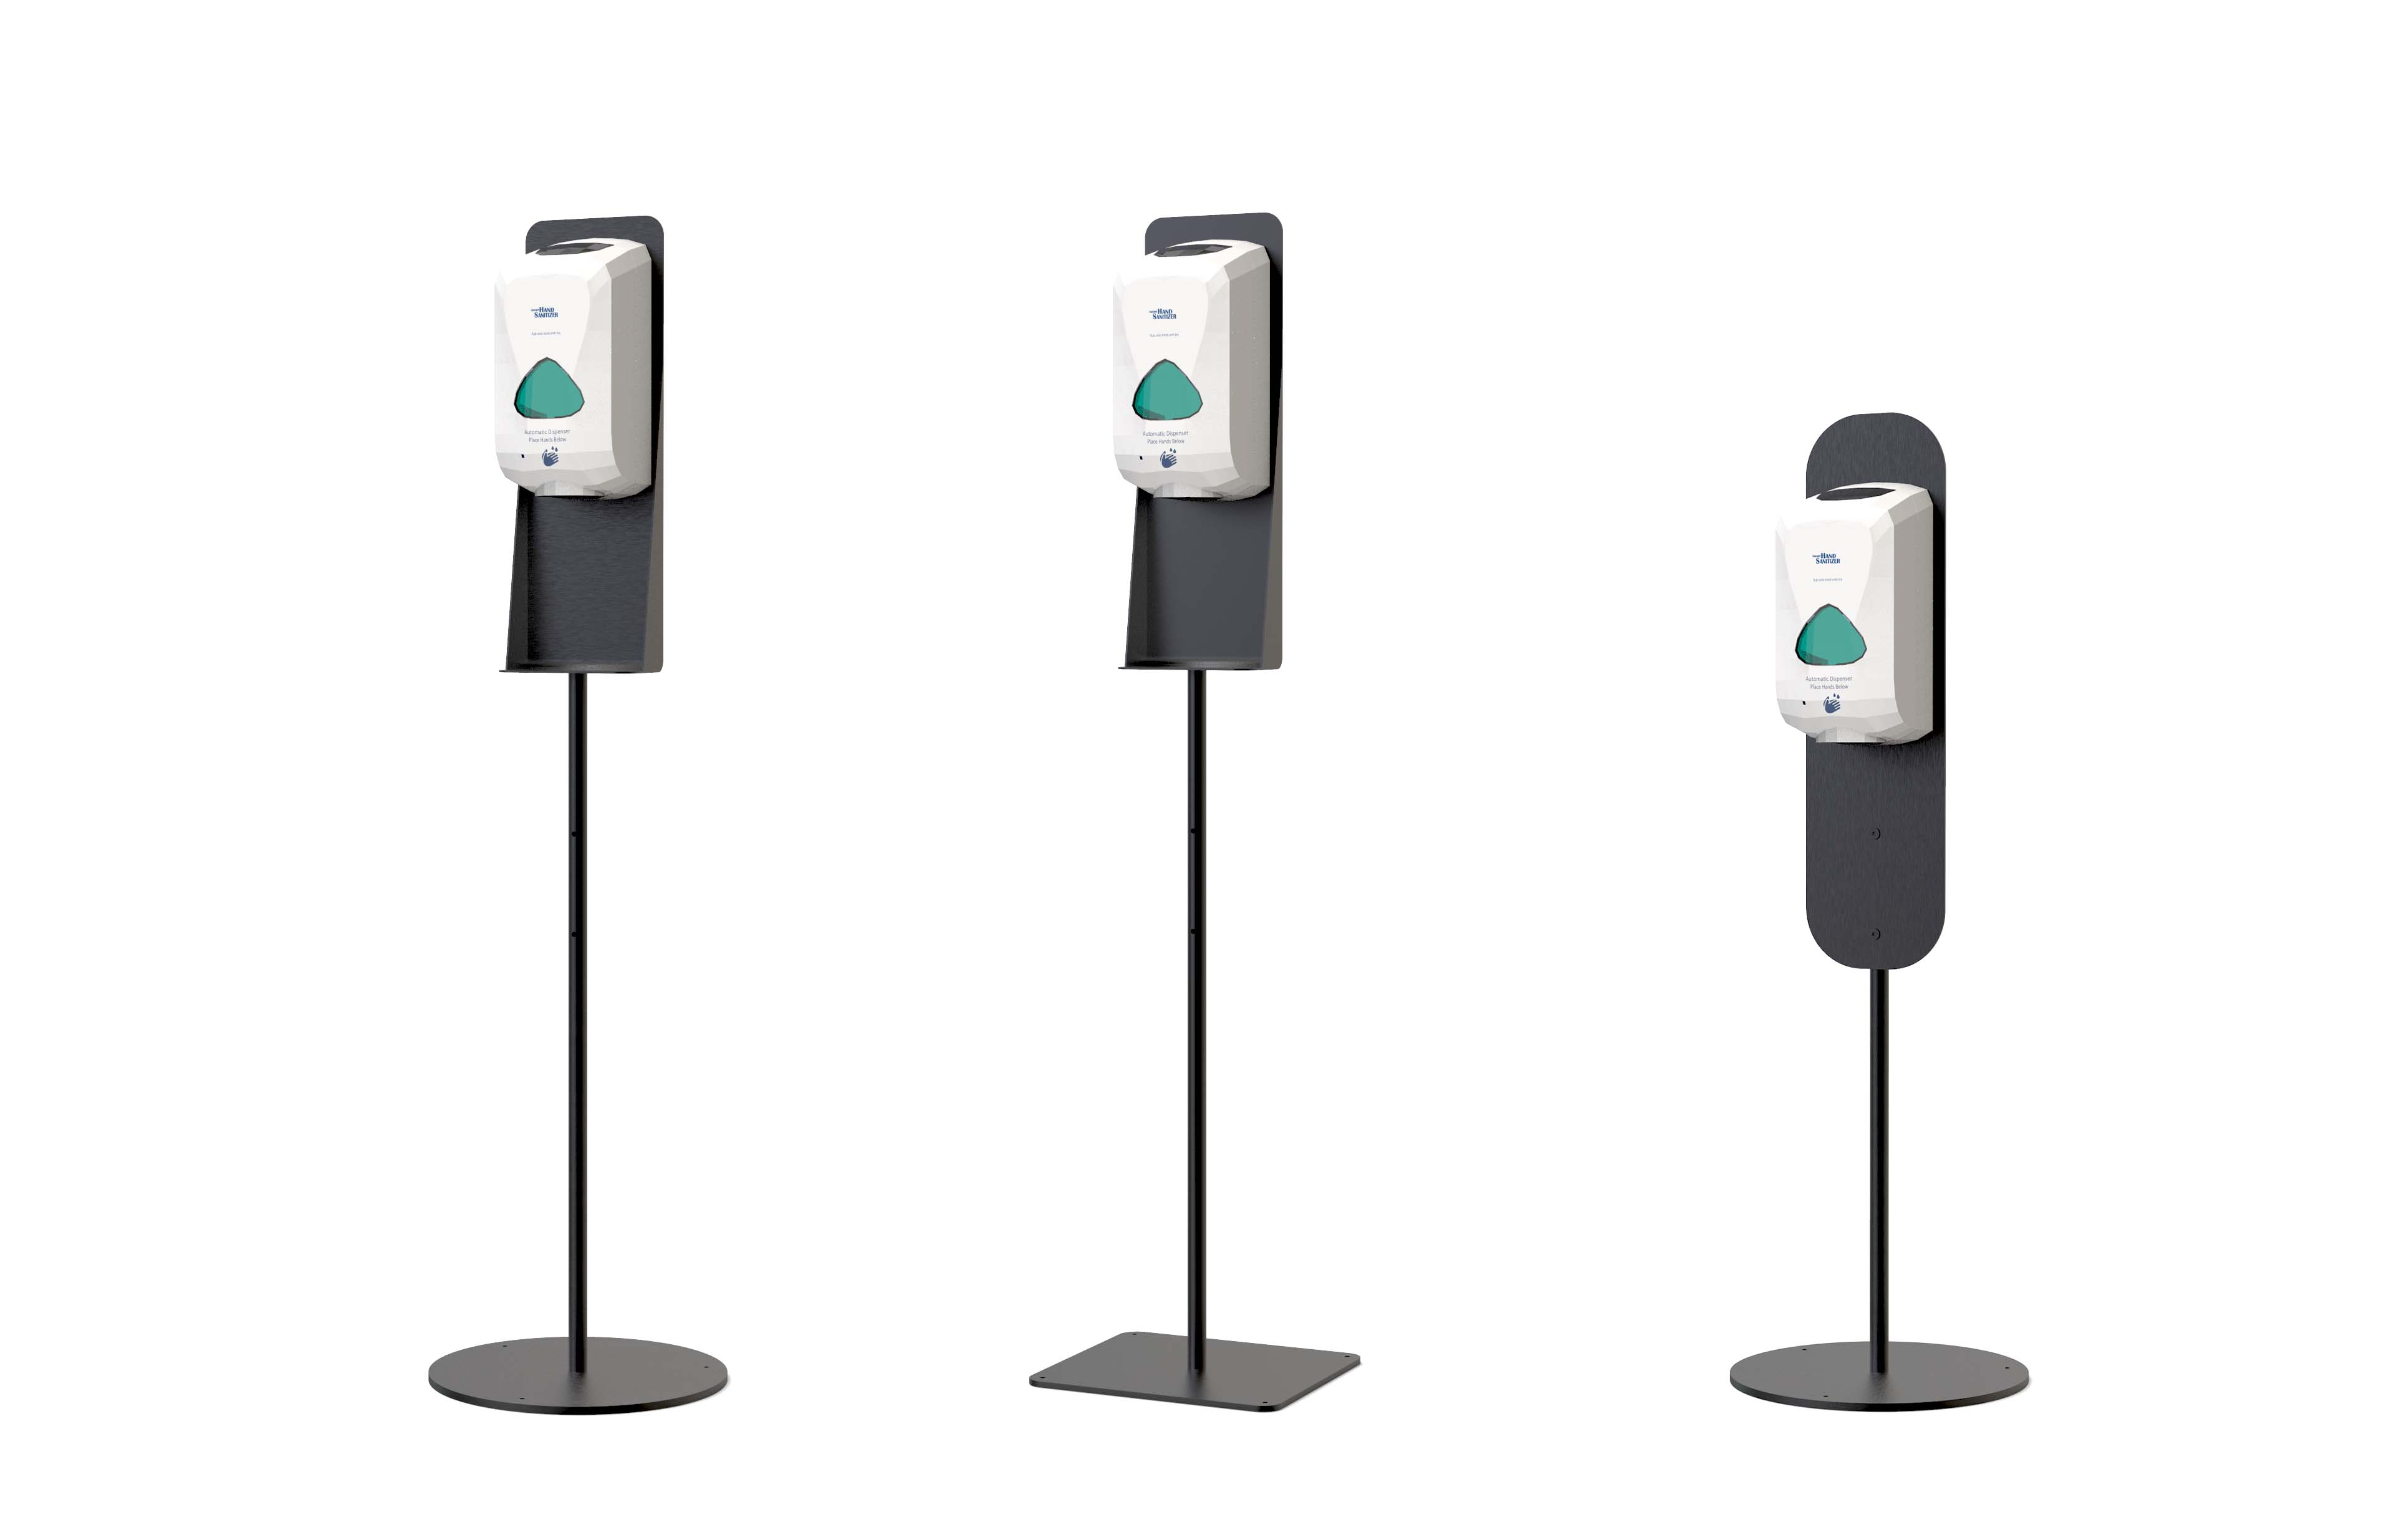 automatic hand sanitizer dispenser stand